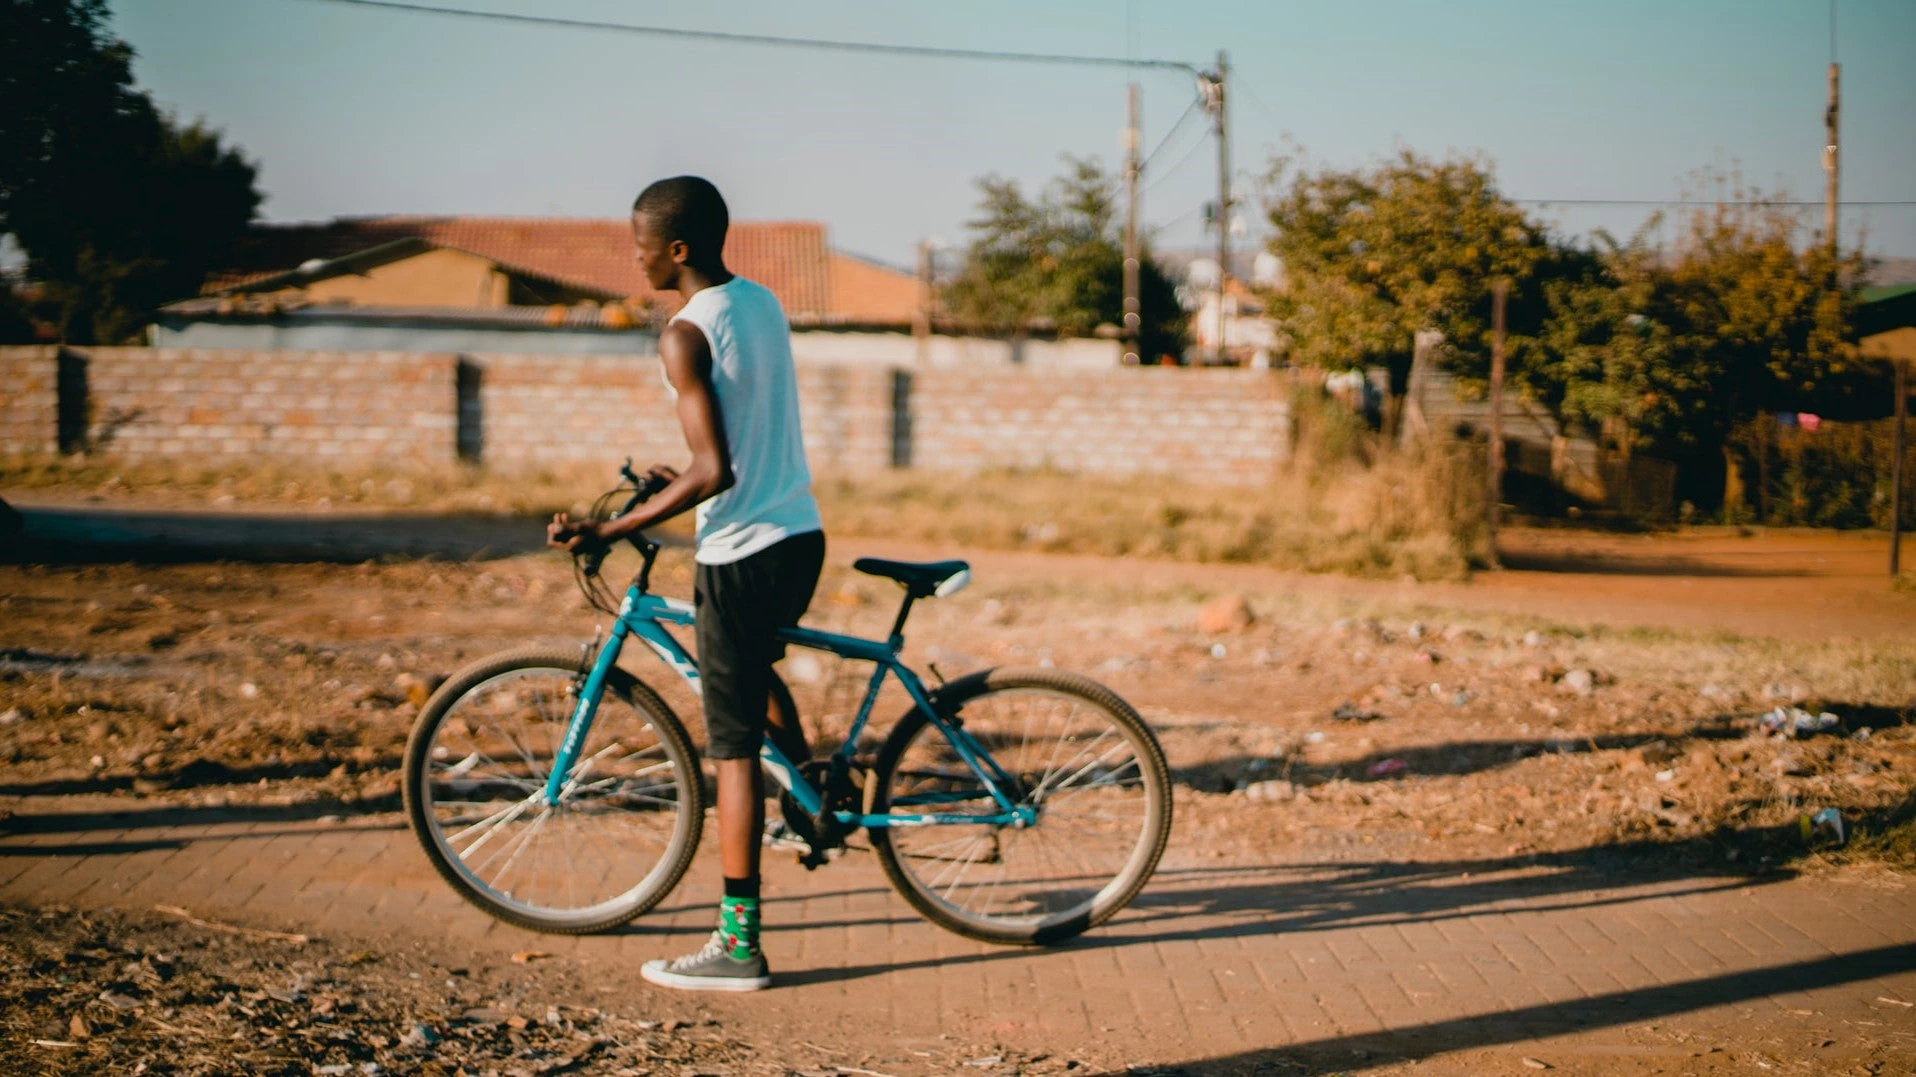 A young cyclist in South Africa. Photo: Rachel Martin/Unsplash